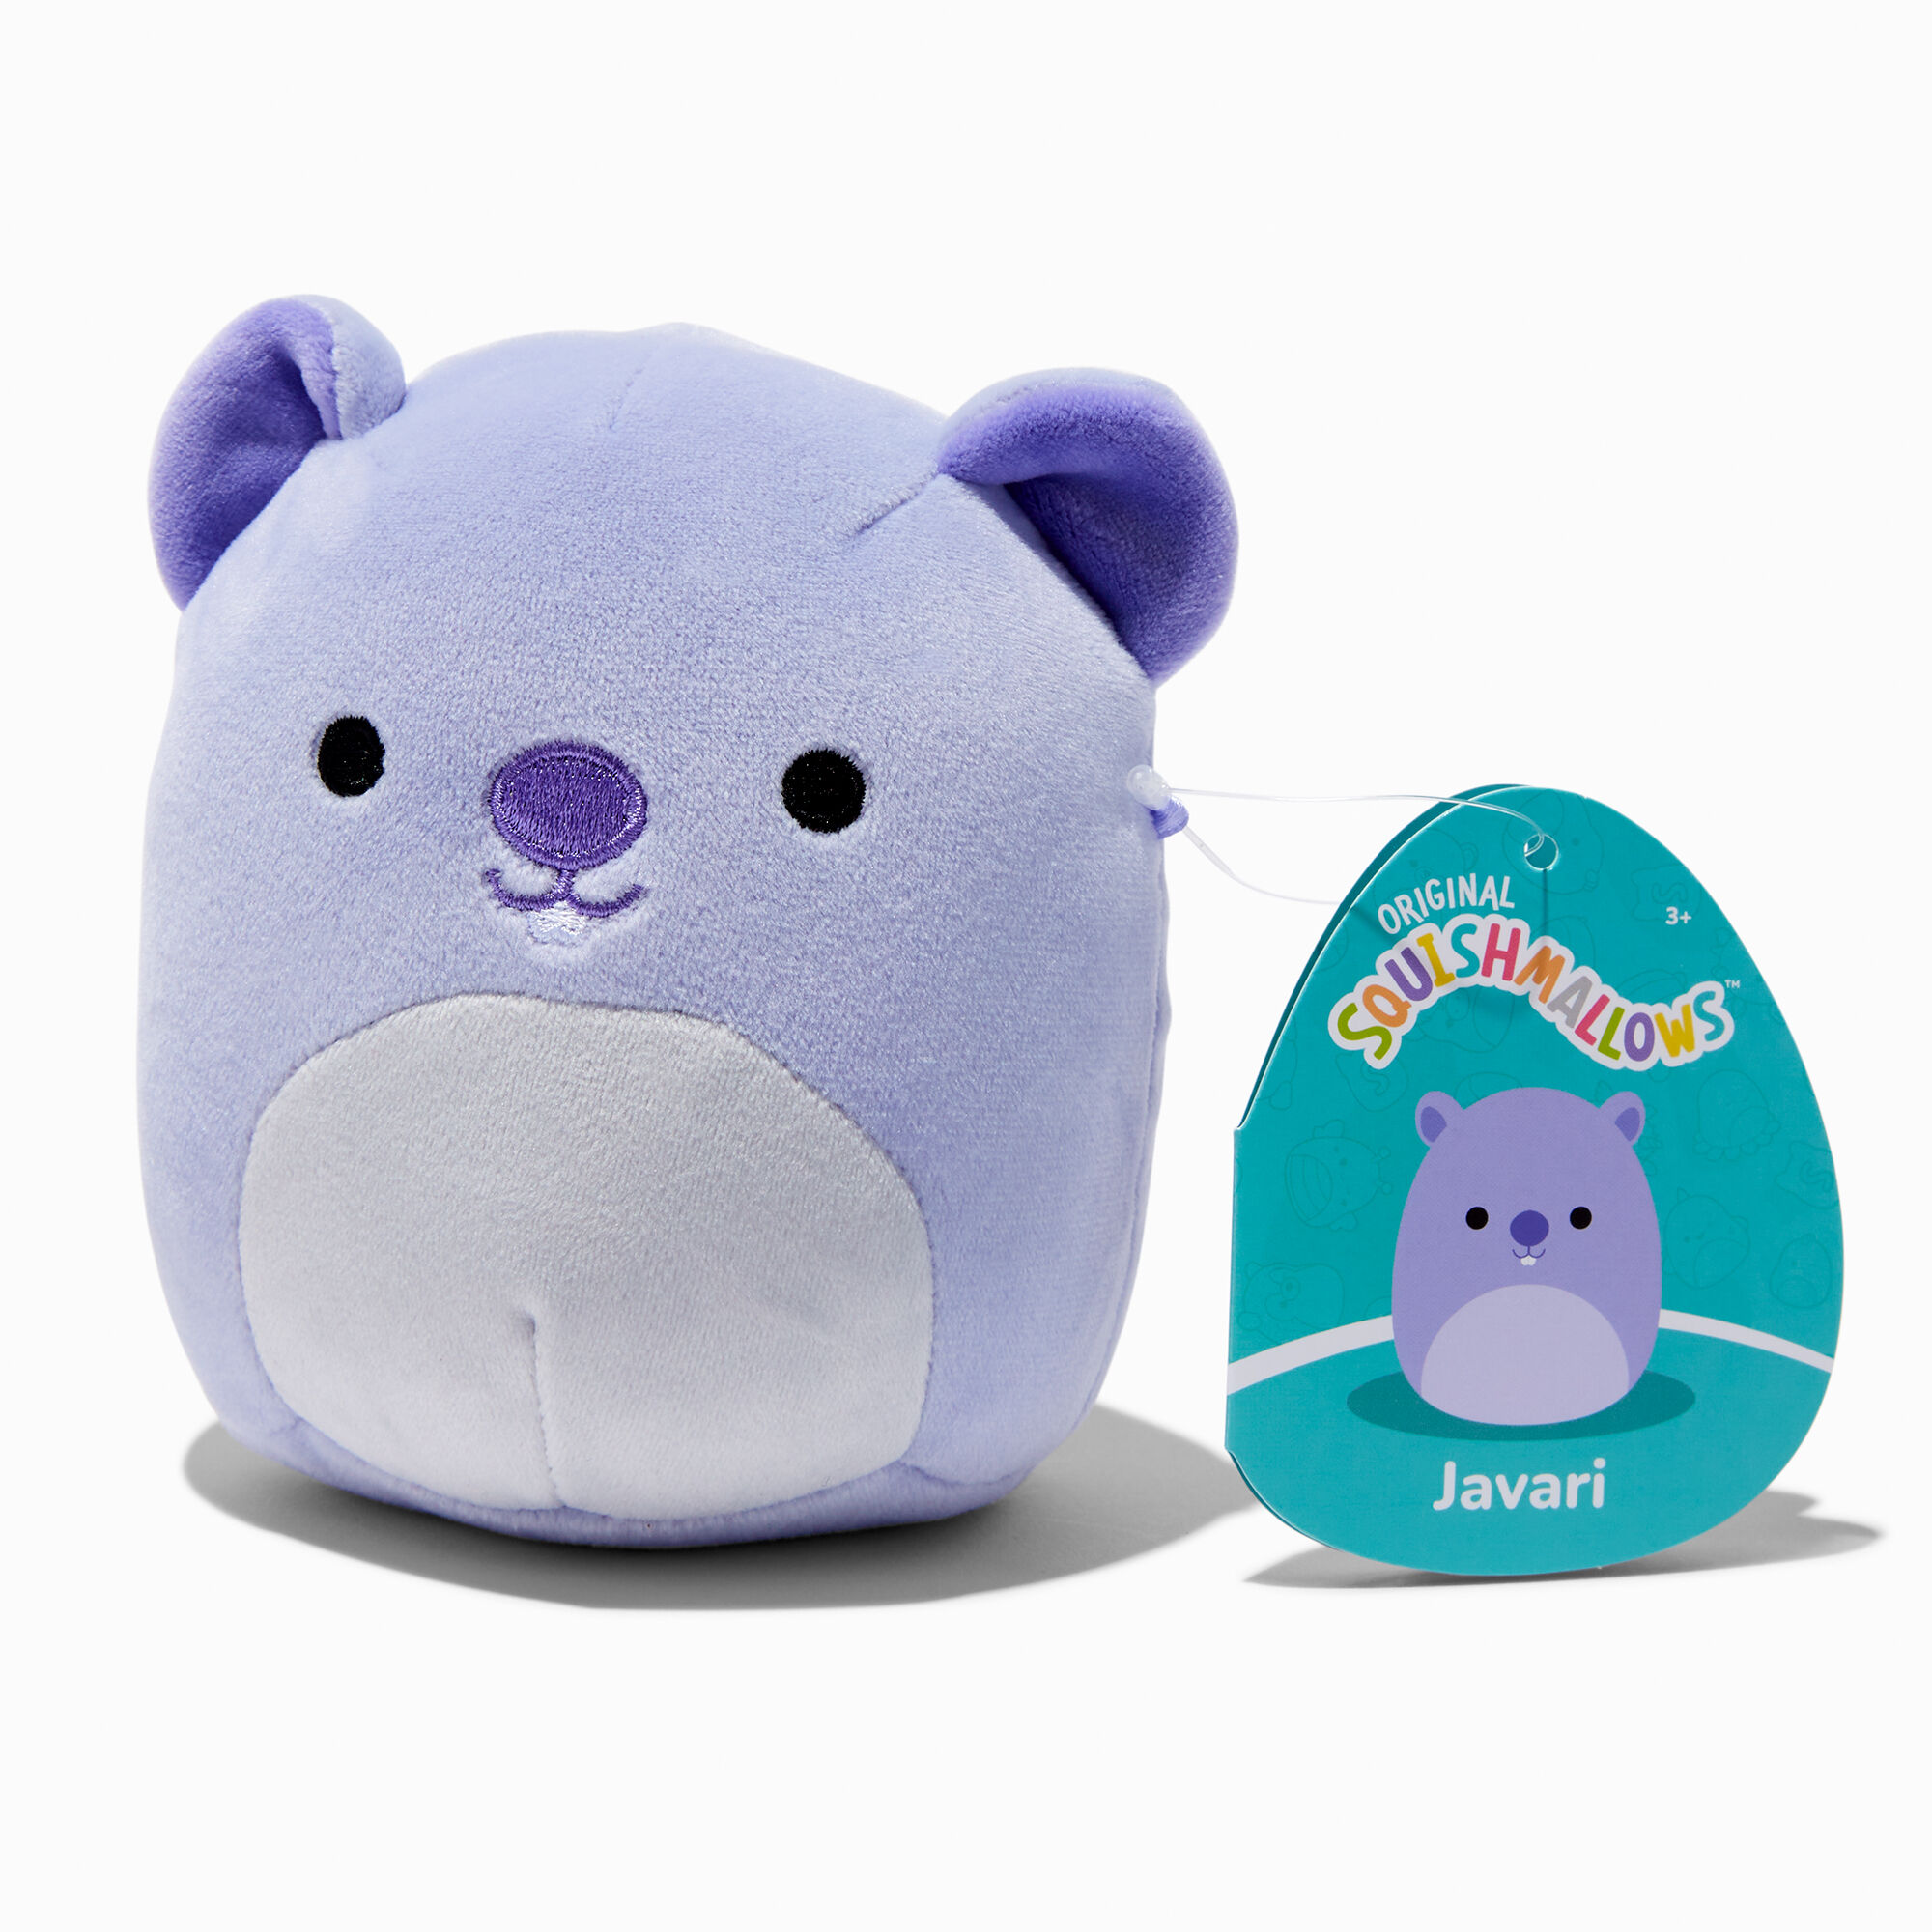 View Claires Squishmallows Online Exclusive 5 Javari Soft Toy information